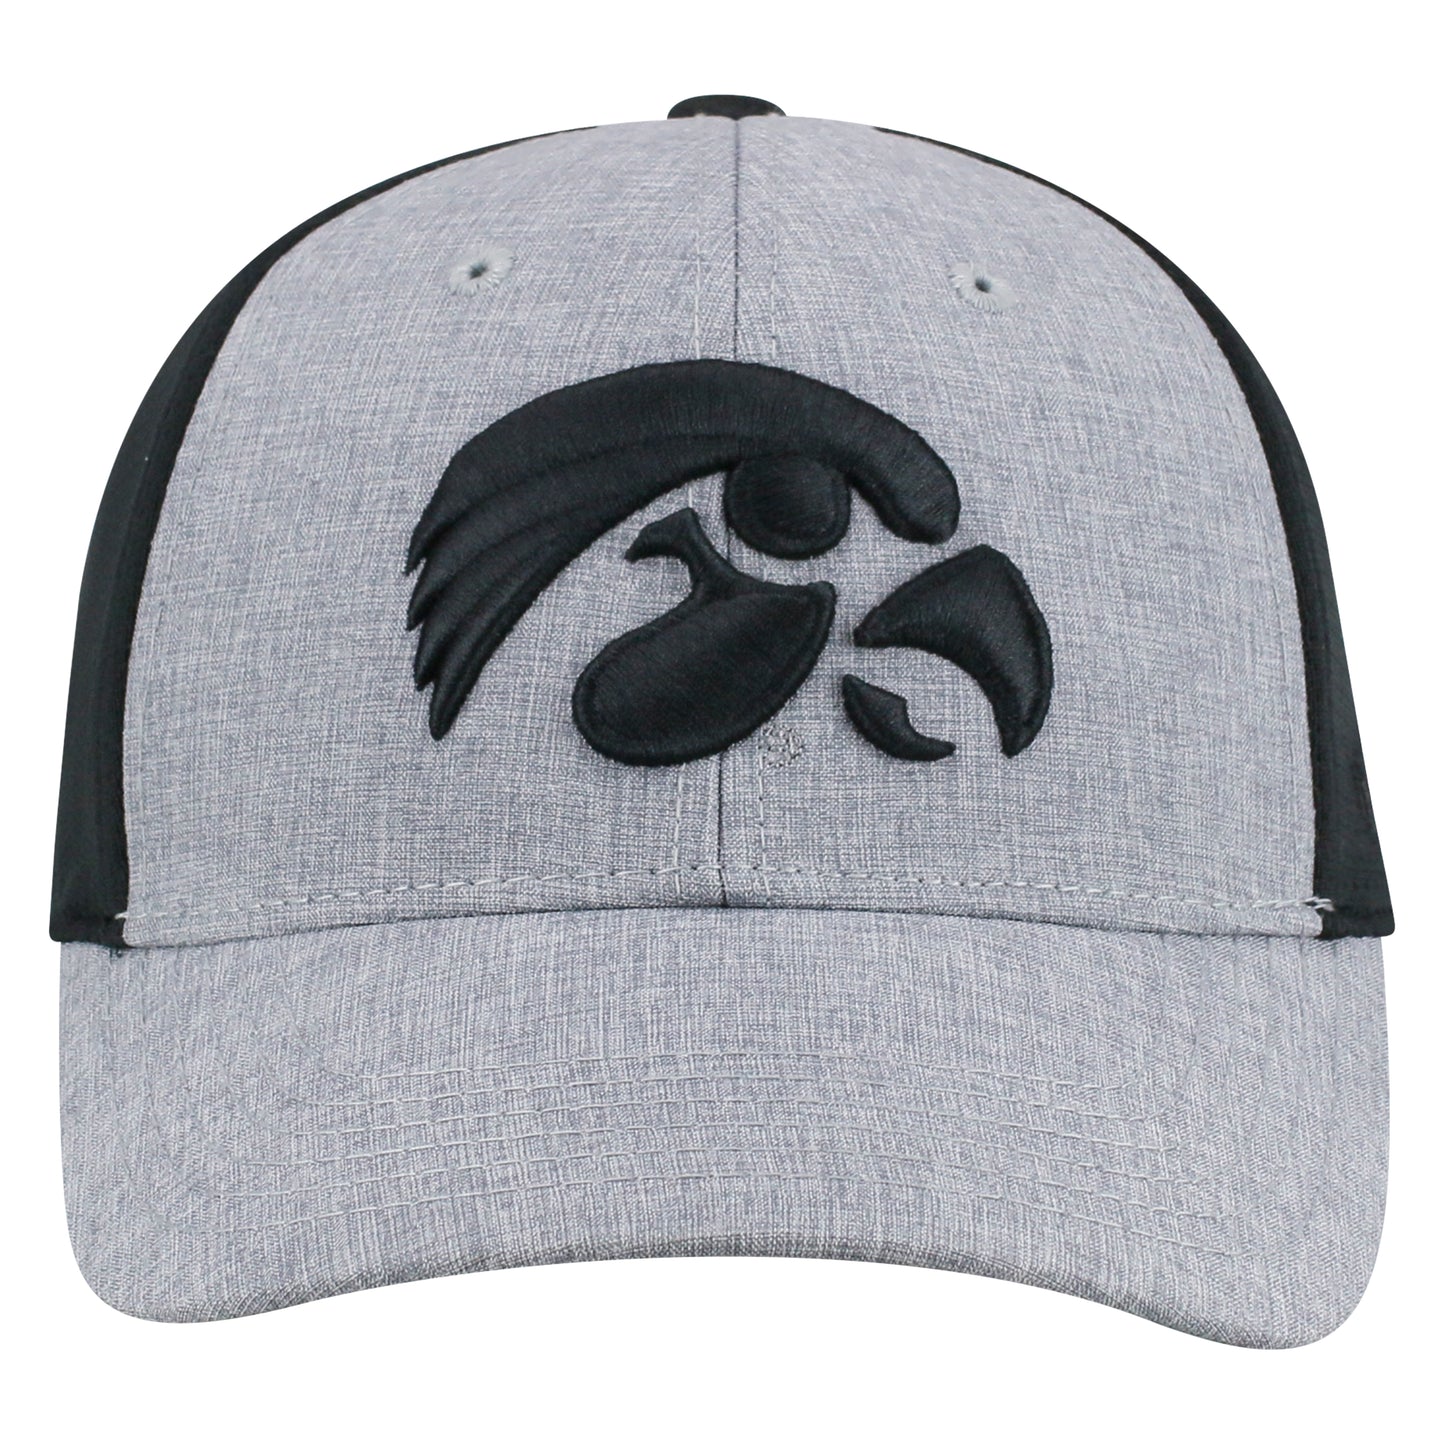 Mens Iowa Hawkeyes Fabooia One Fit Flex Fit Hat By Top Of The World